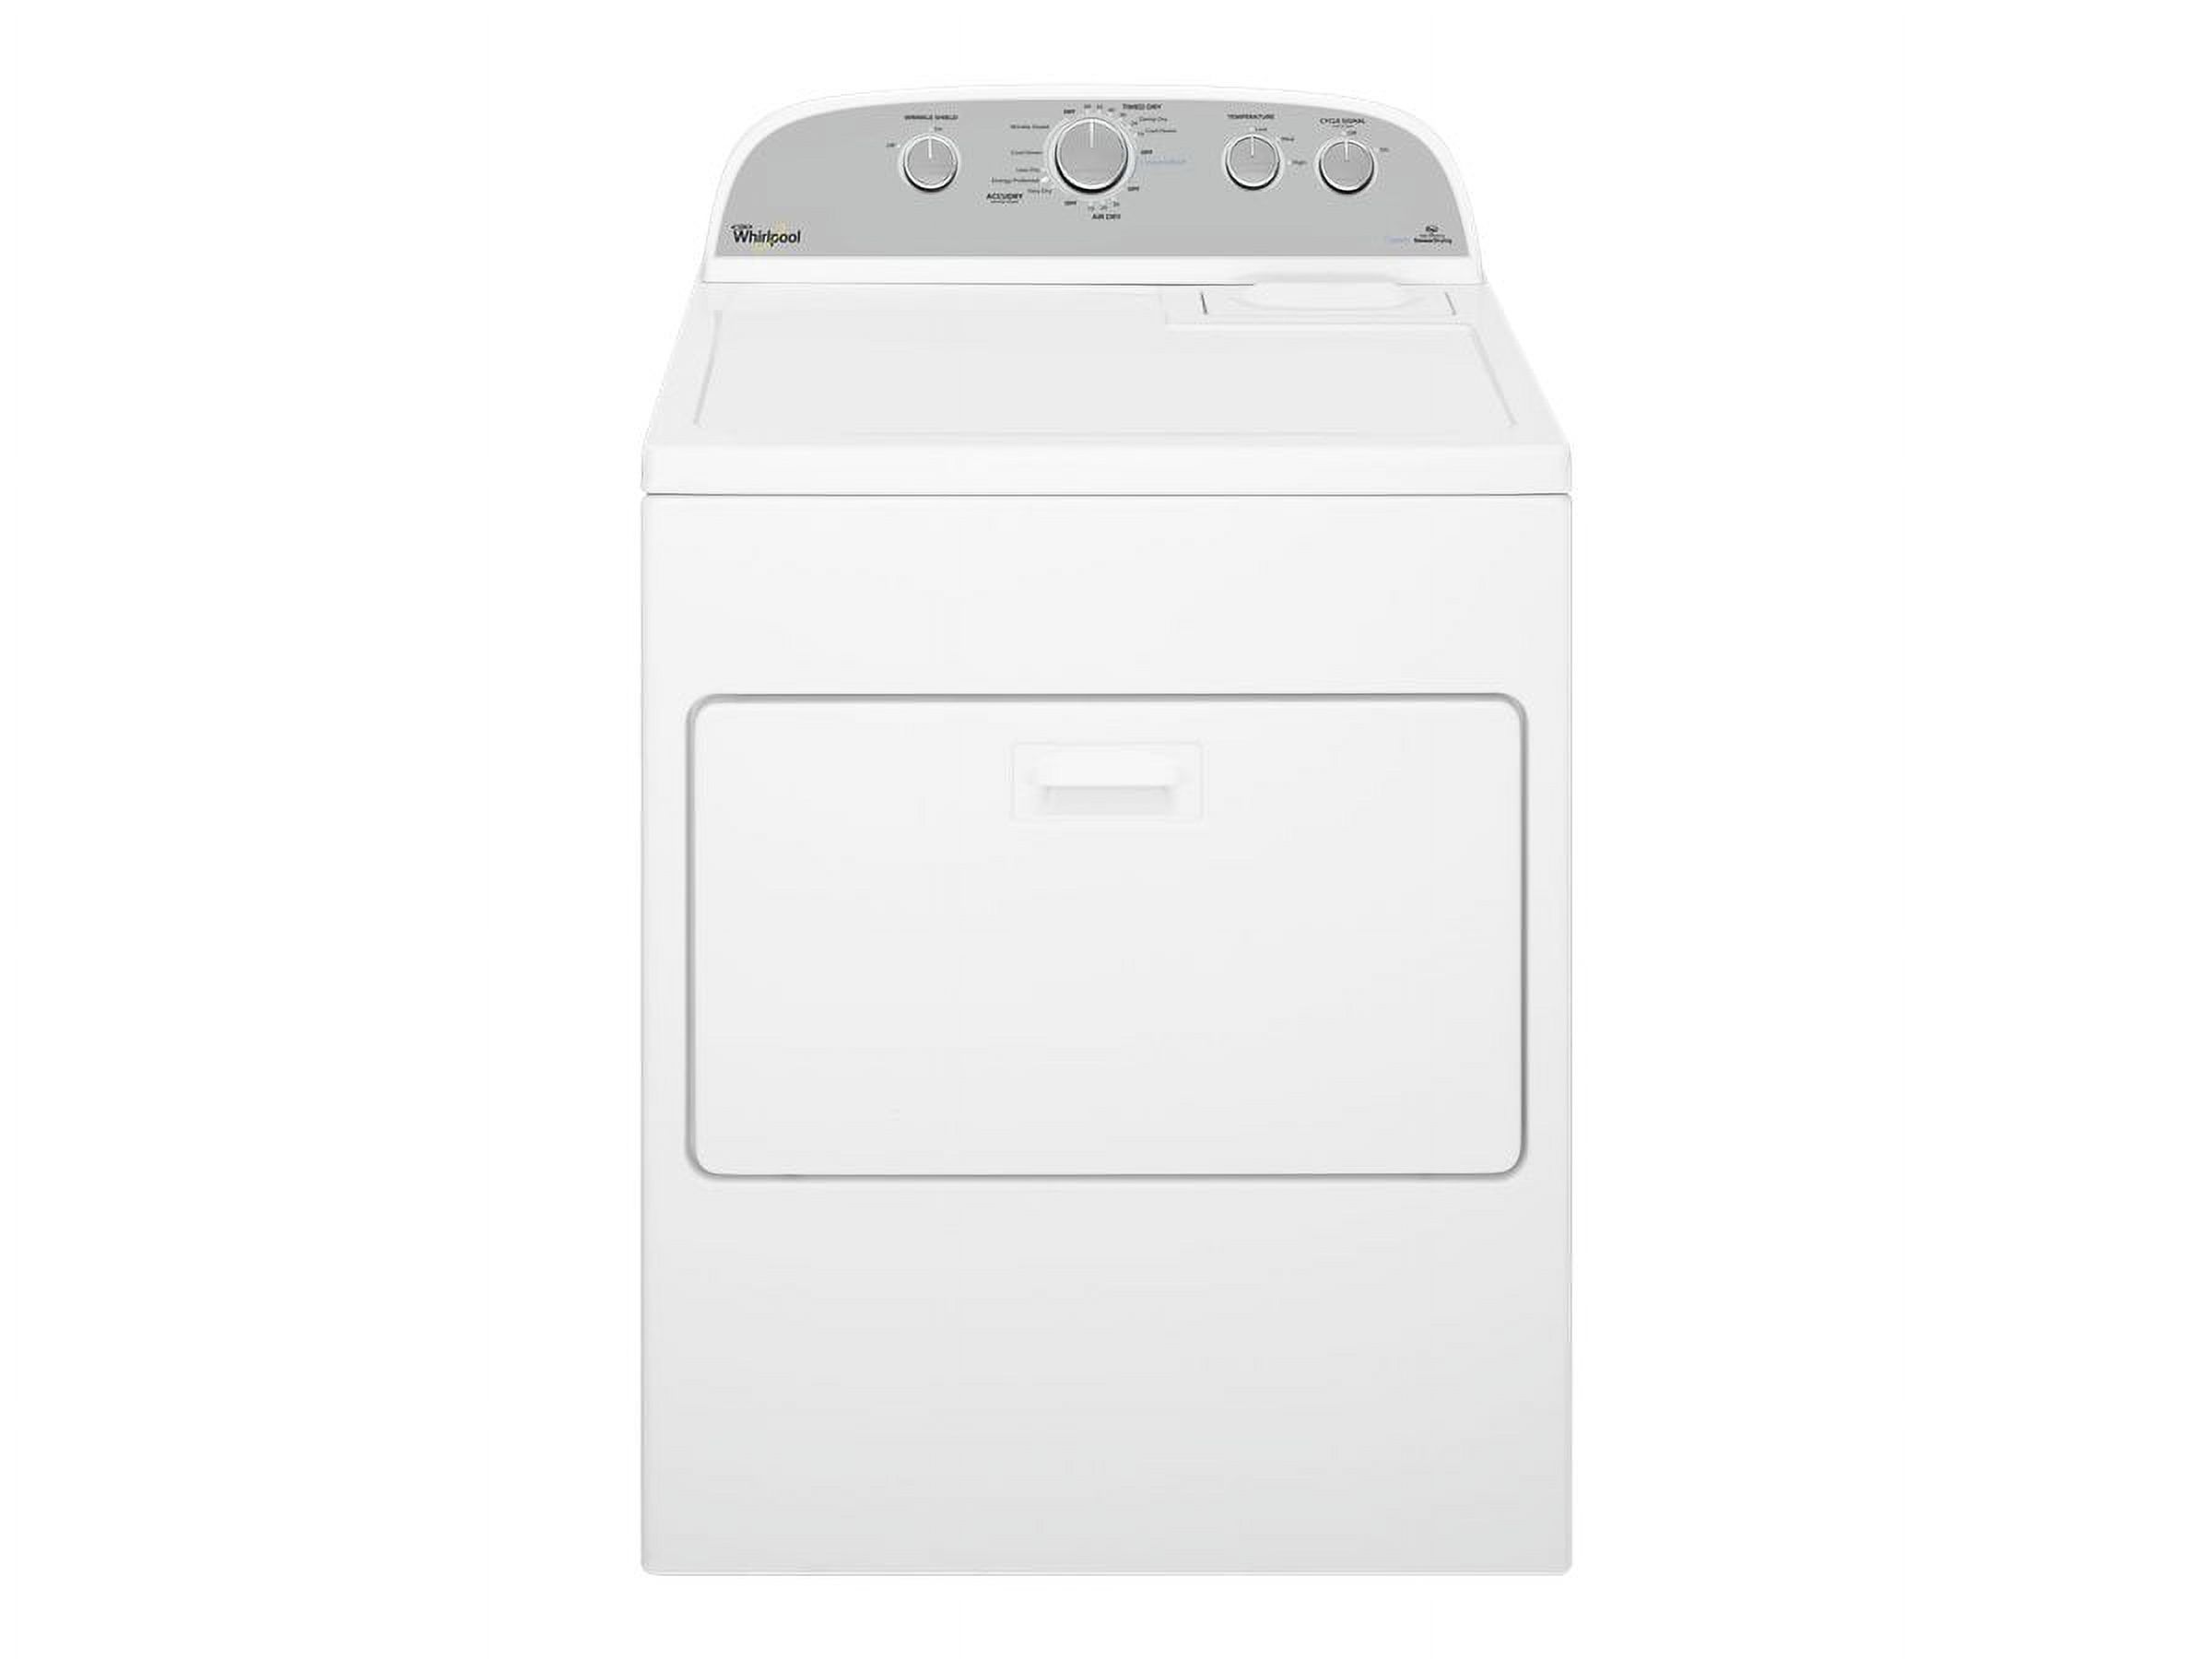 Whirlpool WGD49STBW - Dryer - width: 29 in - depth: 27.8 in - height: 43.4 in - front loading - white - image 1 of 6